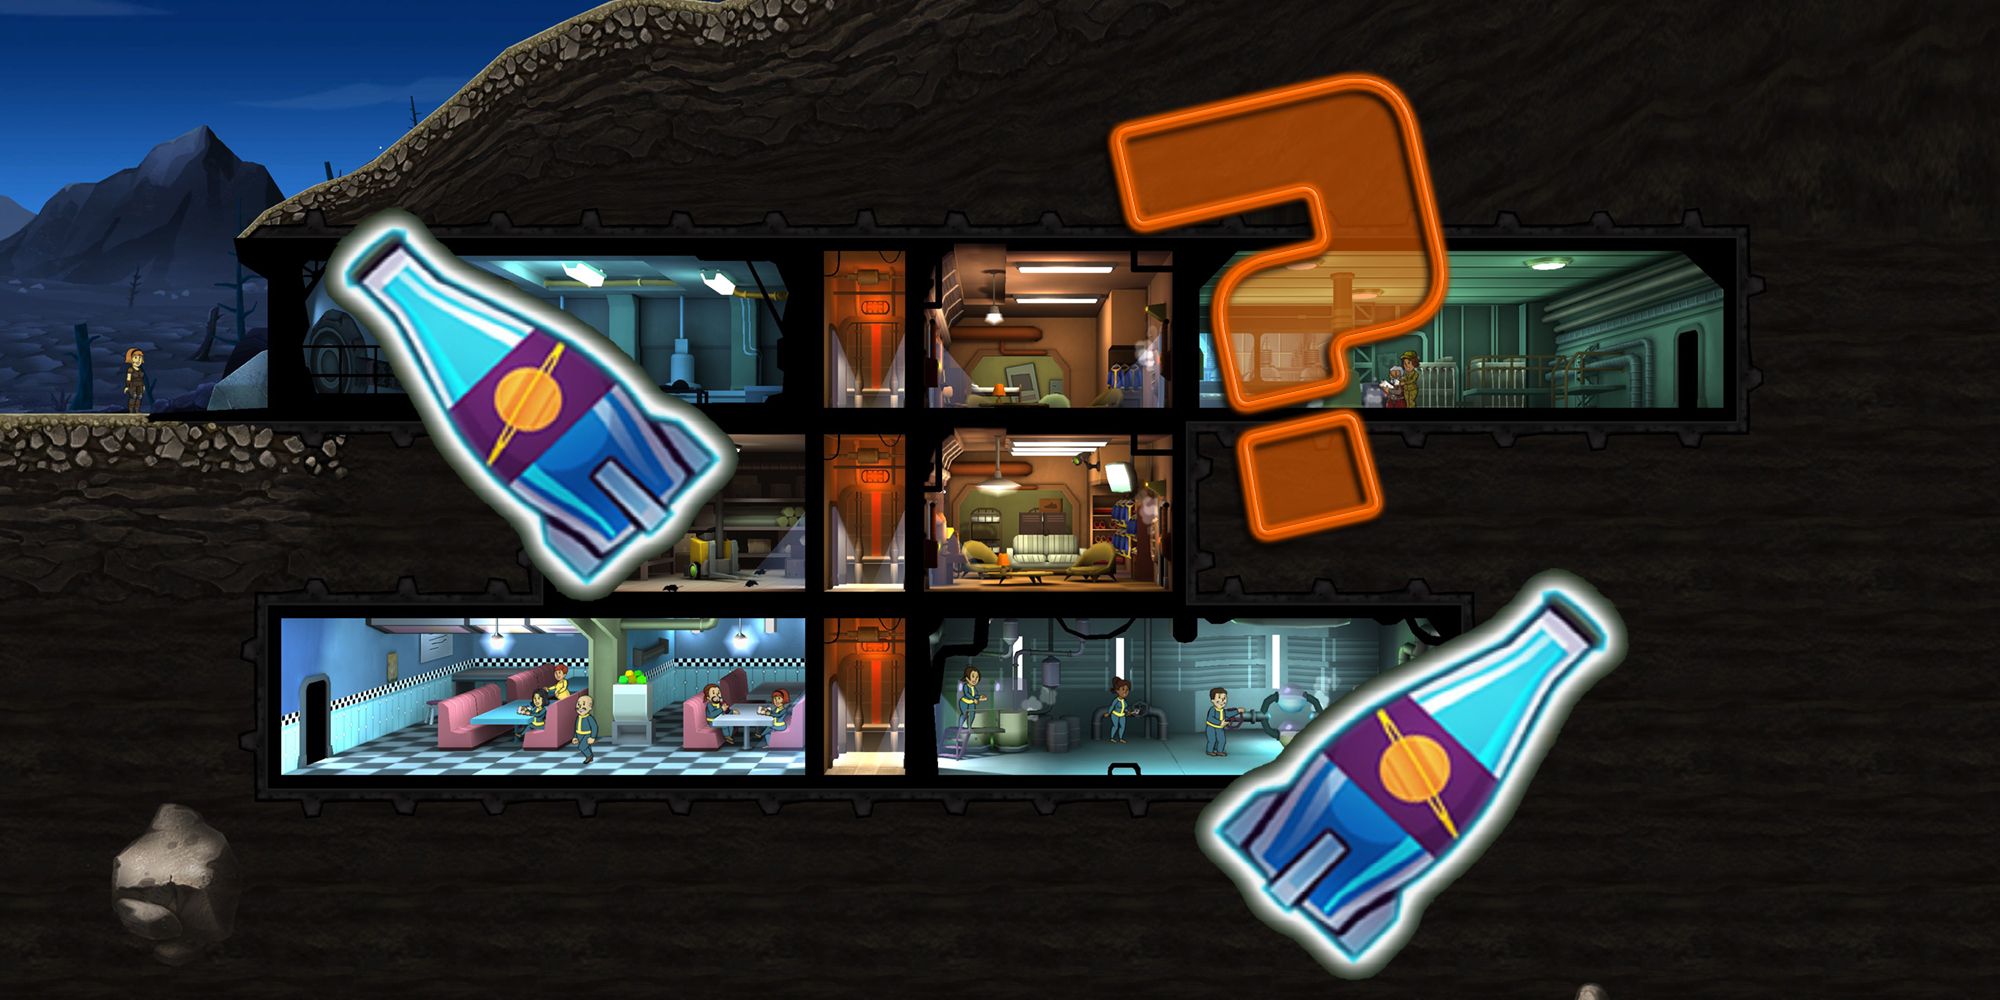 A Fallout Shelter vault with two large Nuka Cola bottles and an orange question mark.